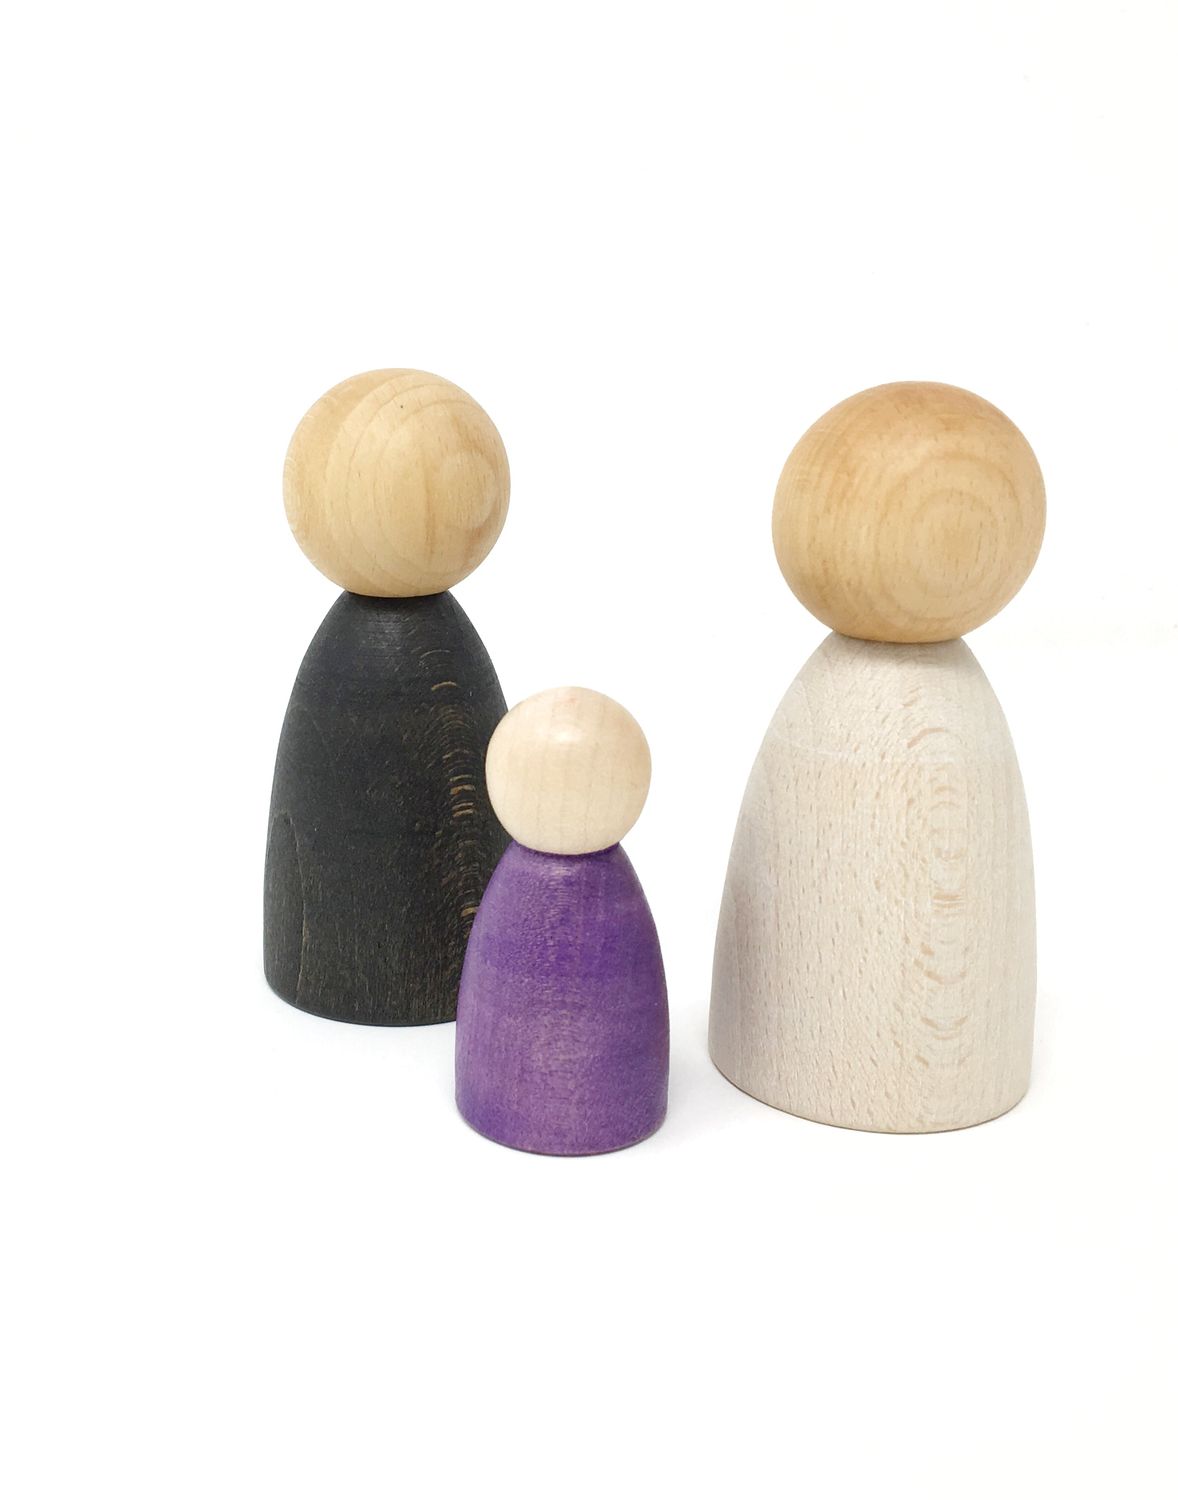 Grapat wooden toy figures, light wood